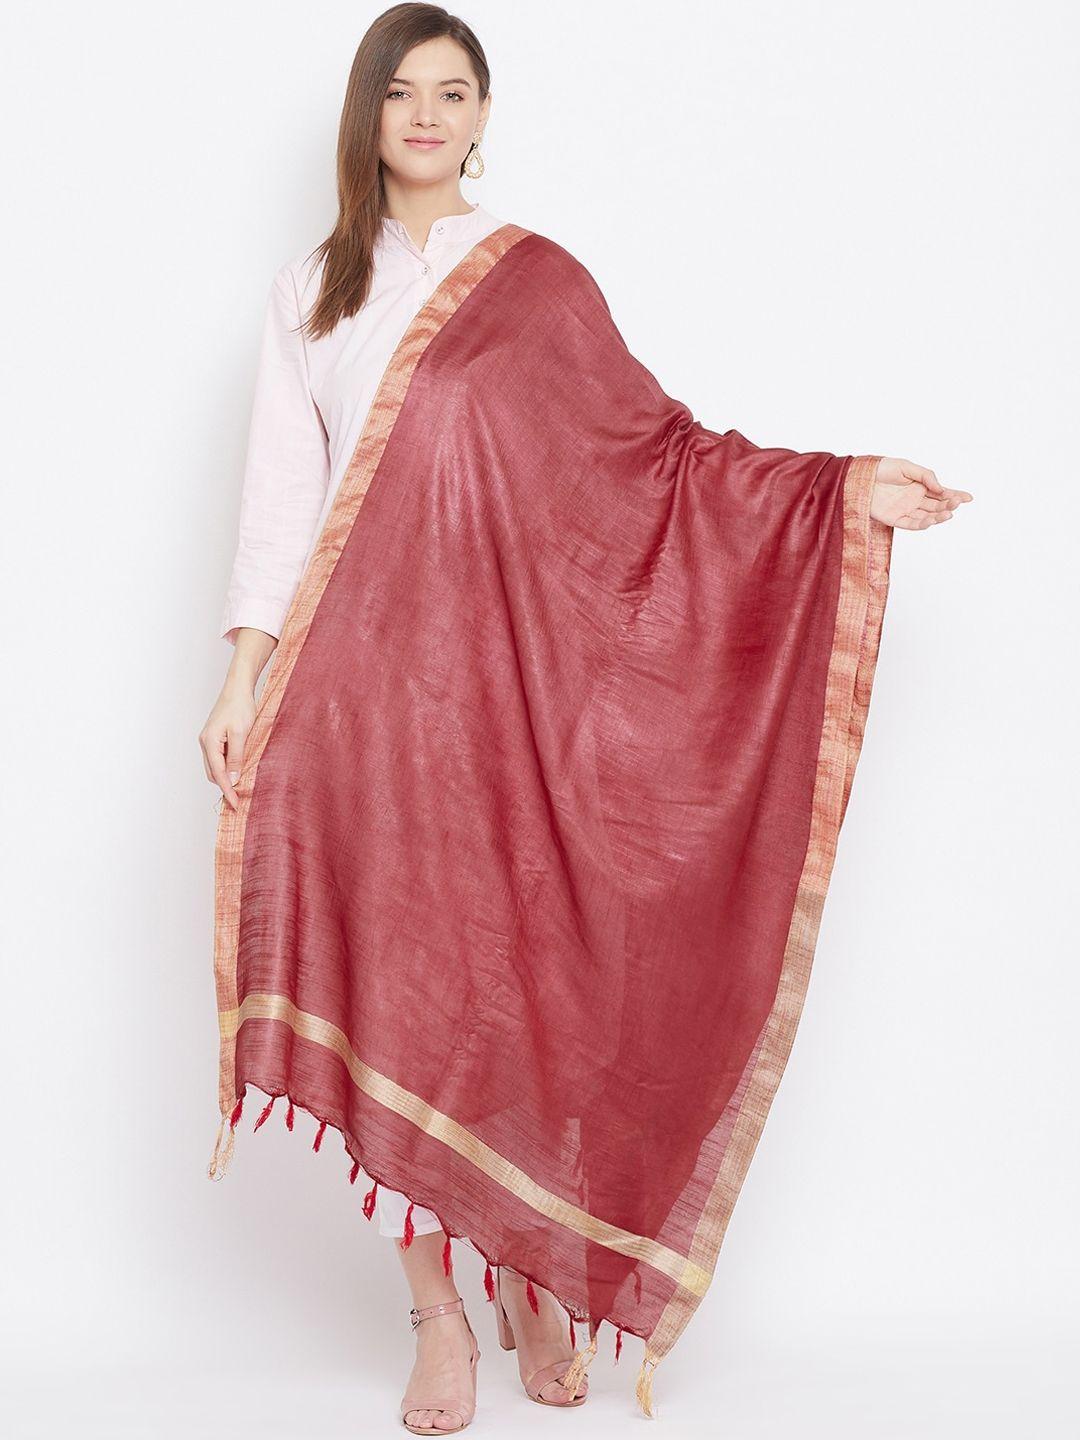 clora creation red & gold-toned solid dupatta